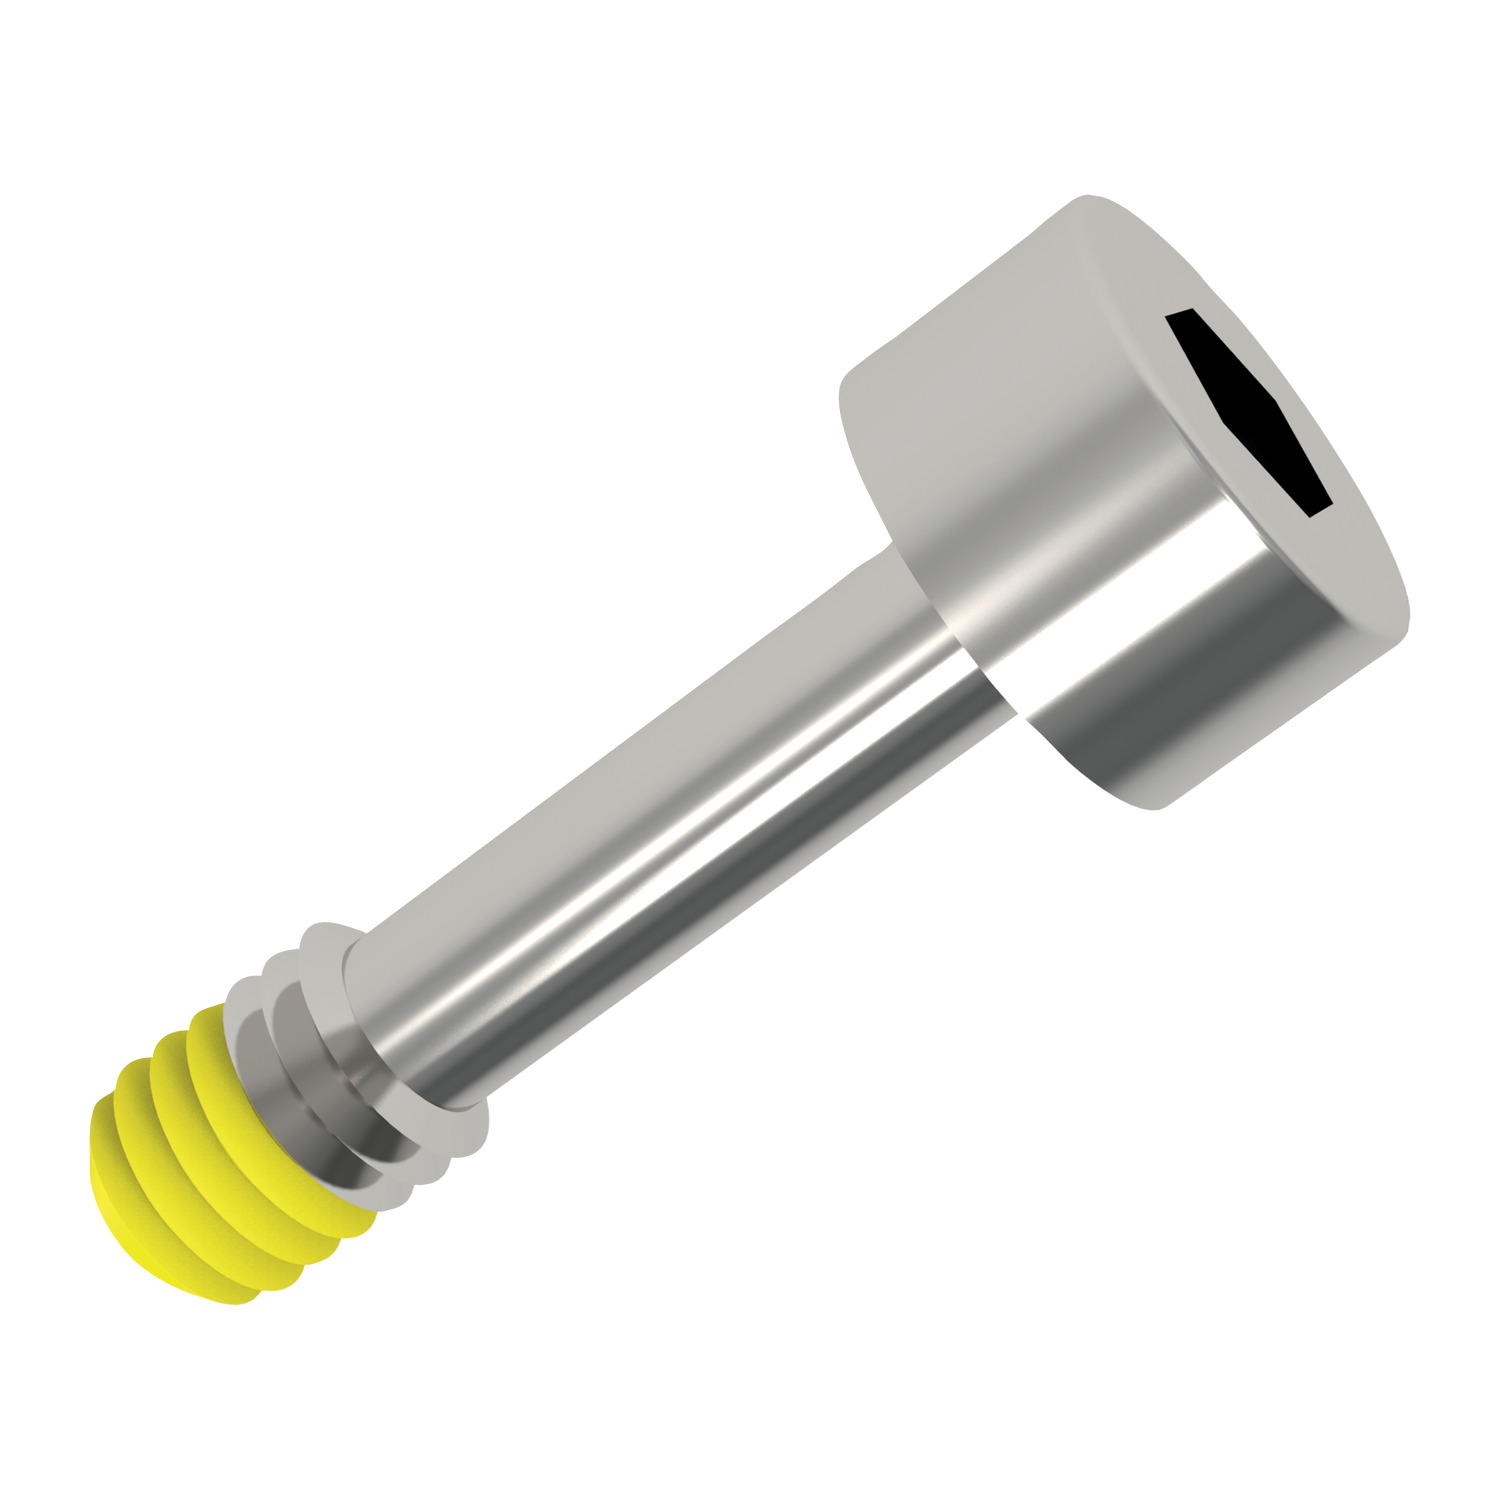 Captive Screws - Cap Head Hex drive with anu-loc 180 locking patch.  Stainless steel AISI 303, 1.4305.  Often used with captive washers P0168 or retaining flanges P0169.A2.  TX drive style also available.